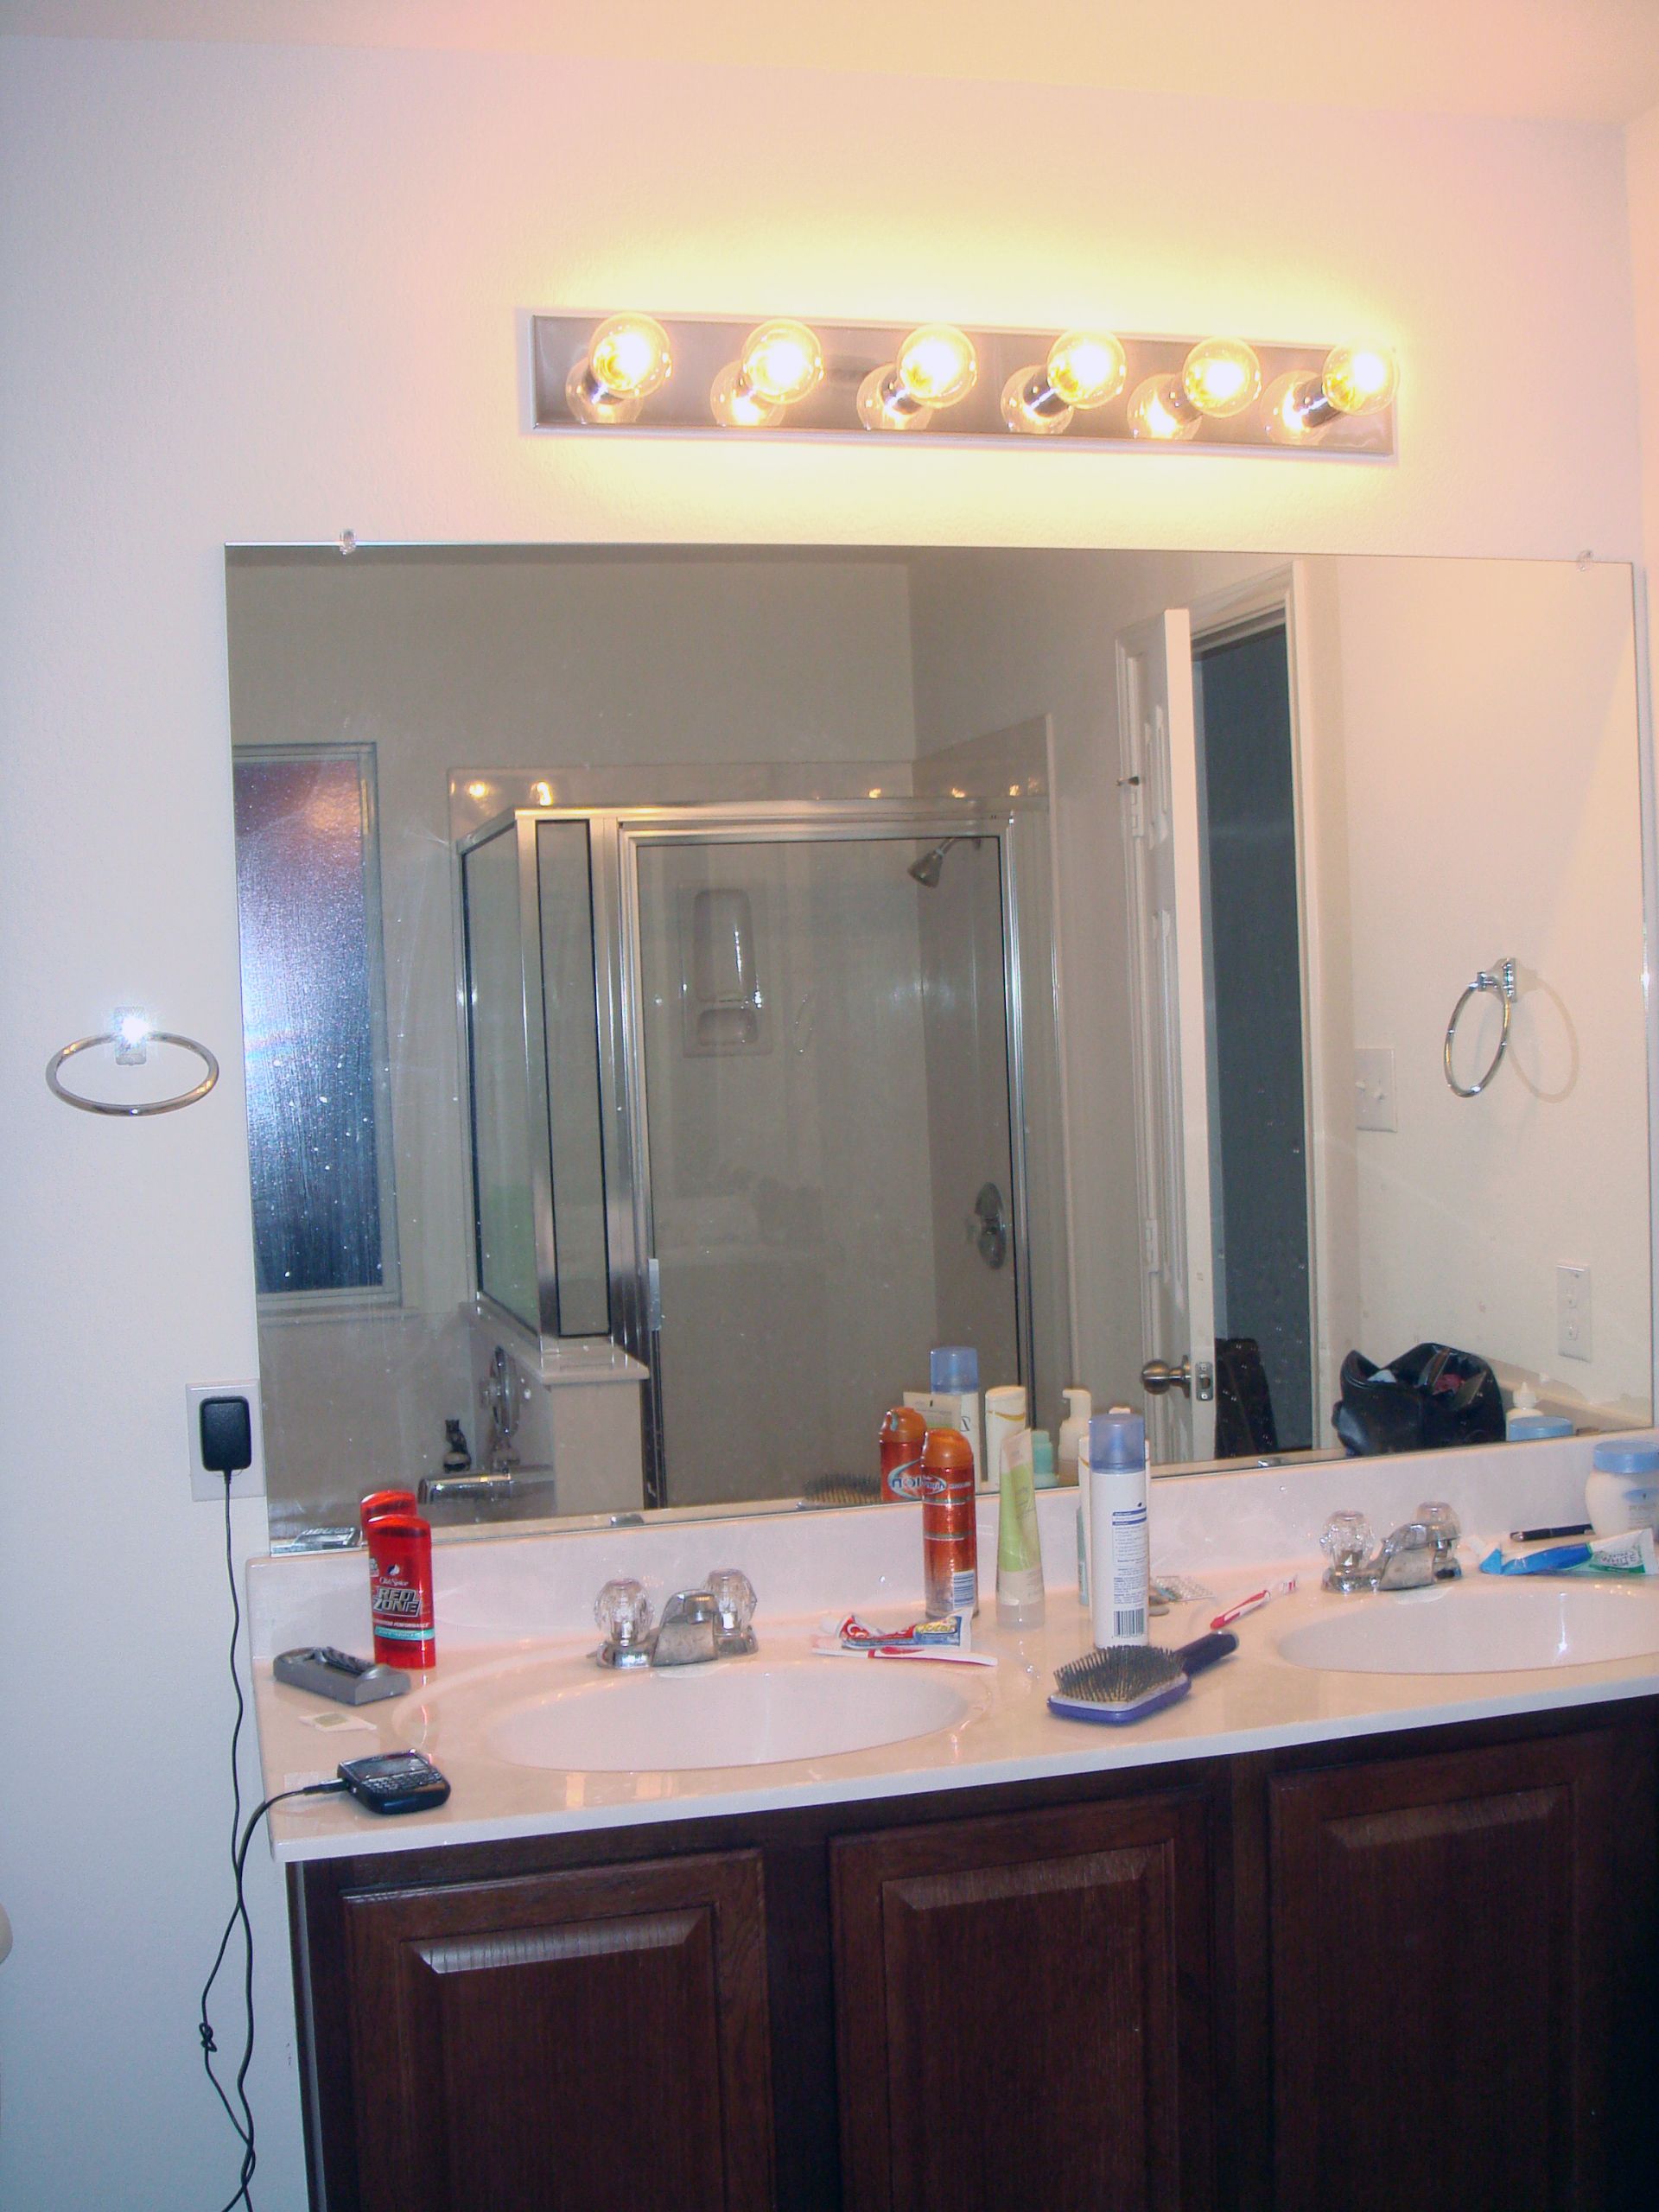 Bathroom Lighting Idea
 Bathroom lighting ideas choices and indecision